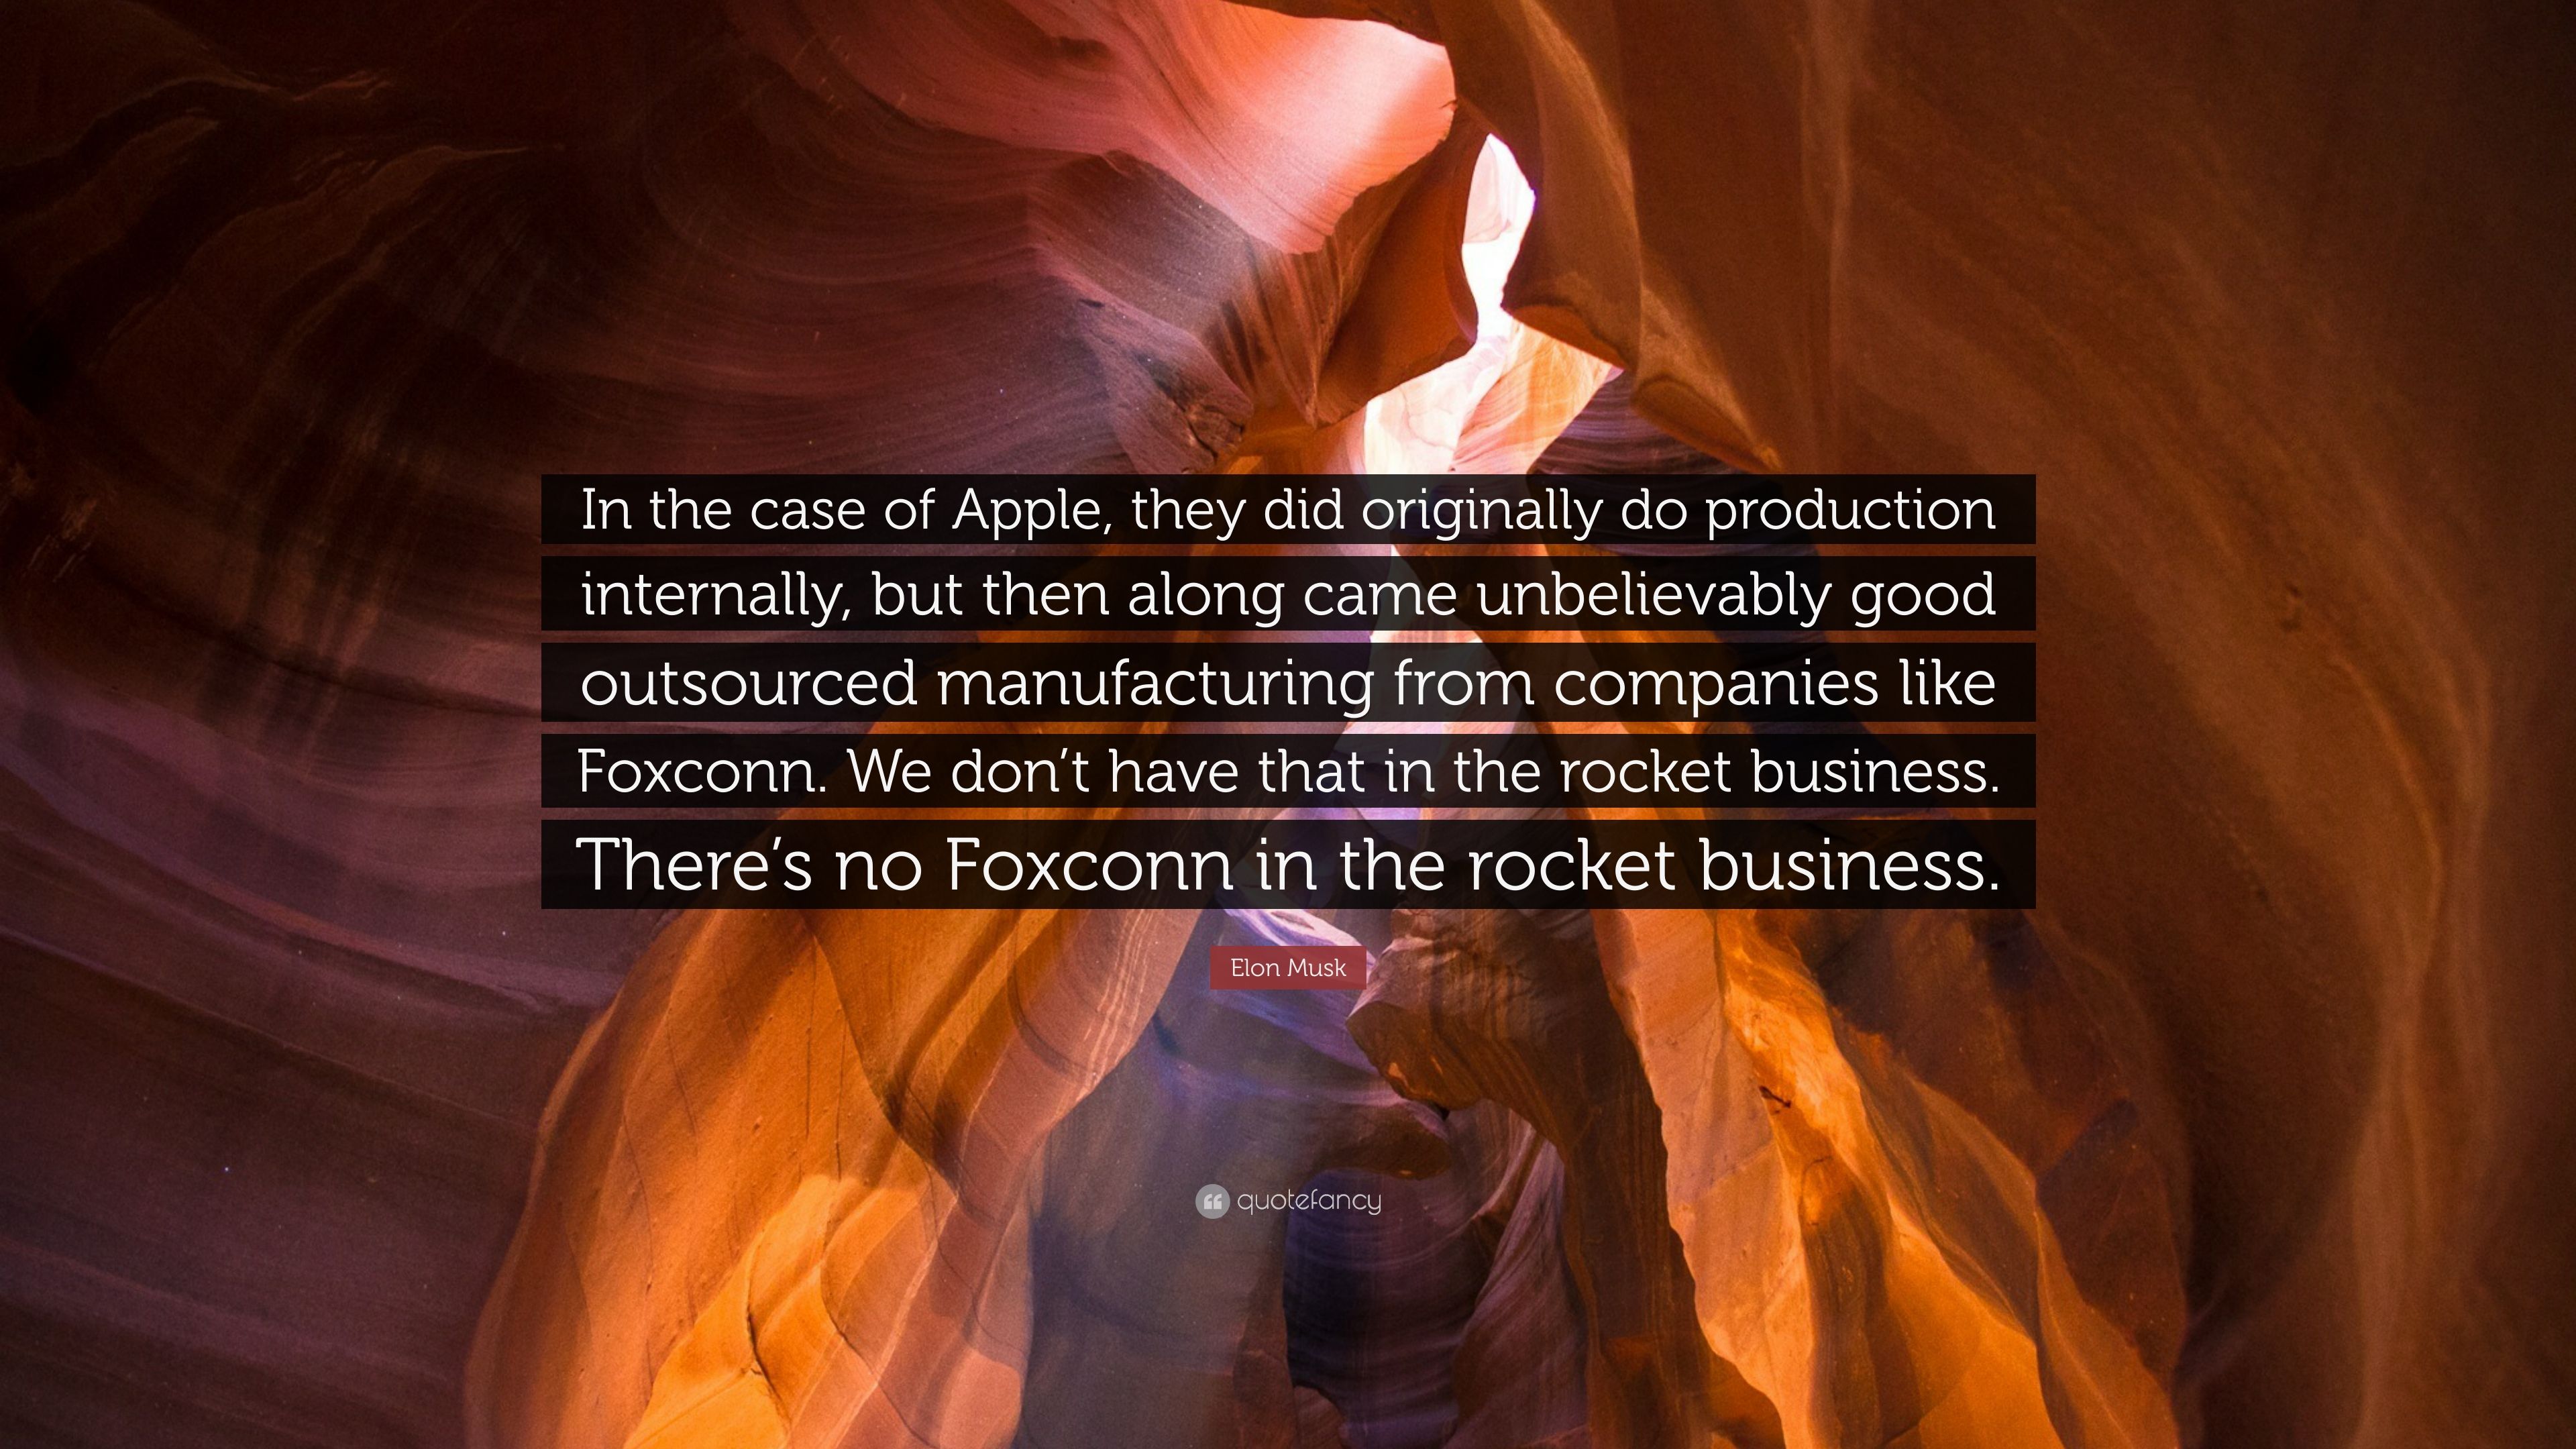 Elon Musk Quote: “In the case of Apple, they did originally do production internally, but then along came unbelievably good outsourced man.” (7 wallpaper)